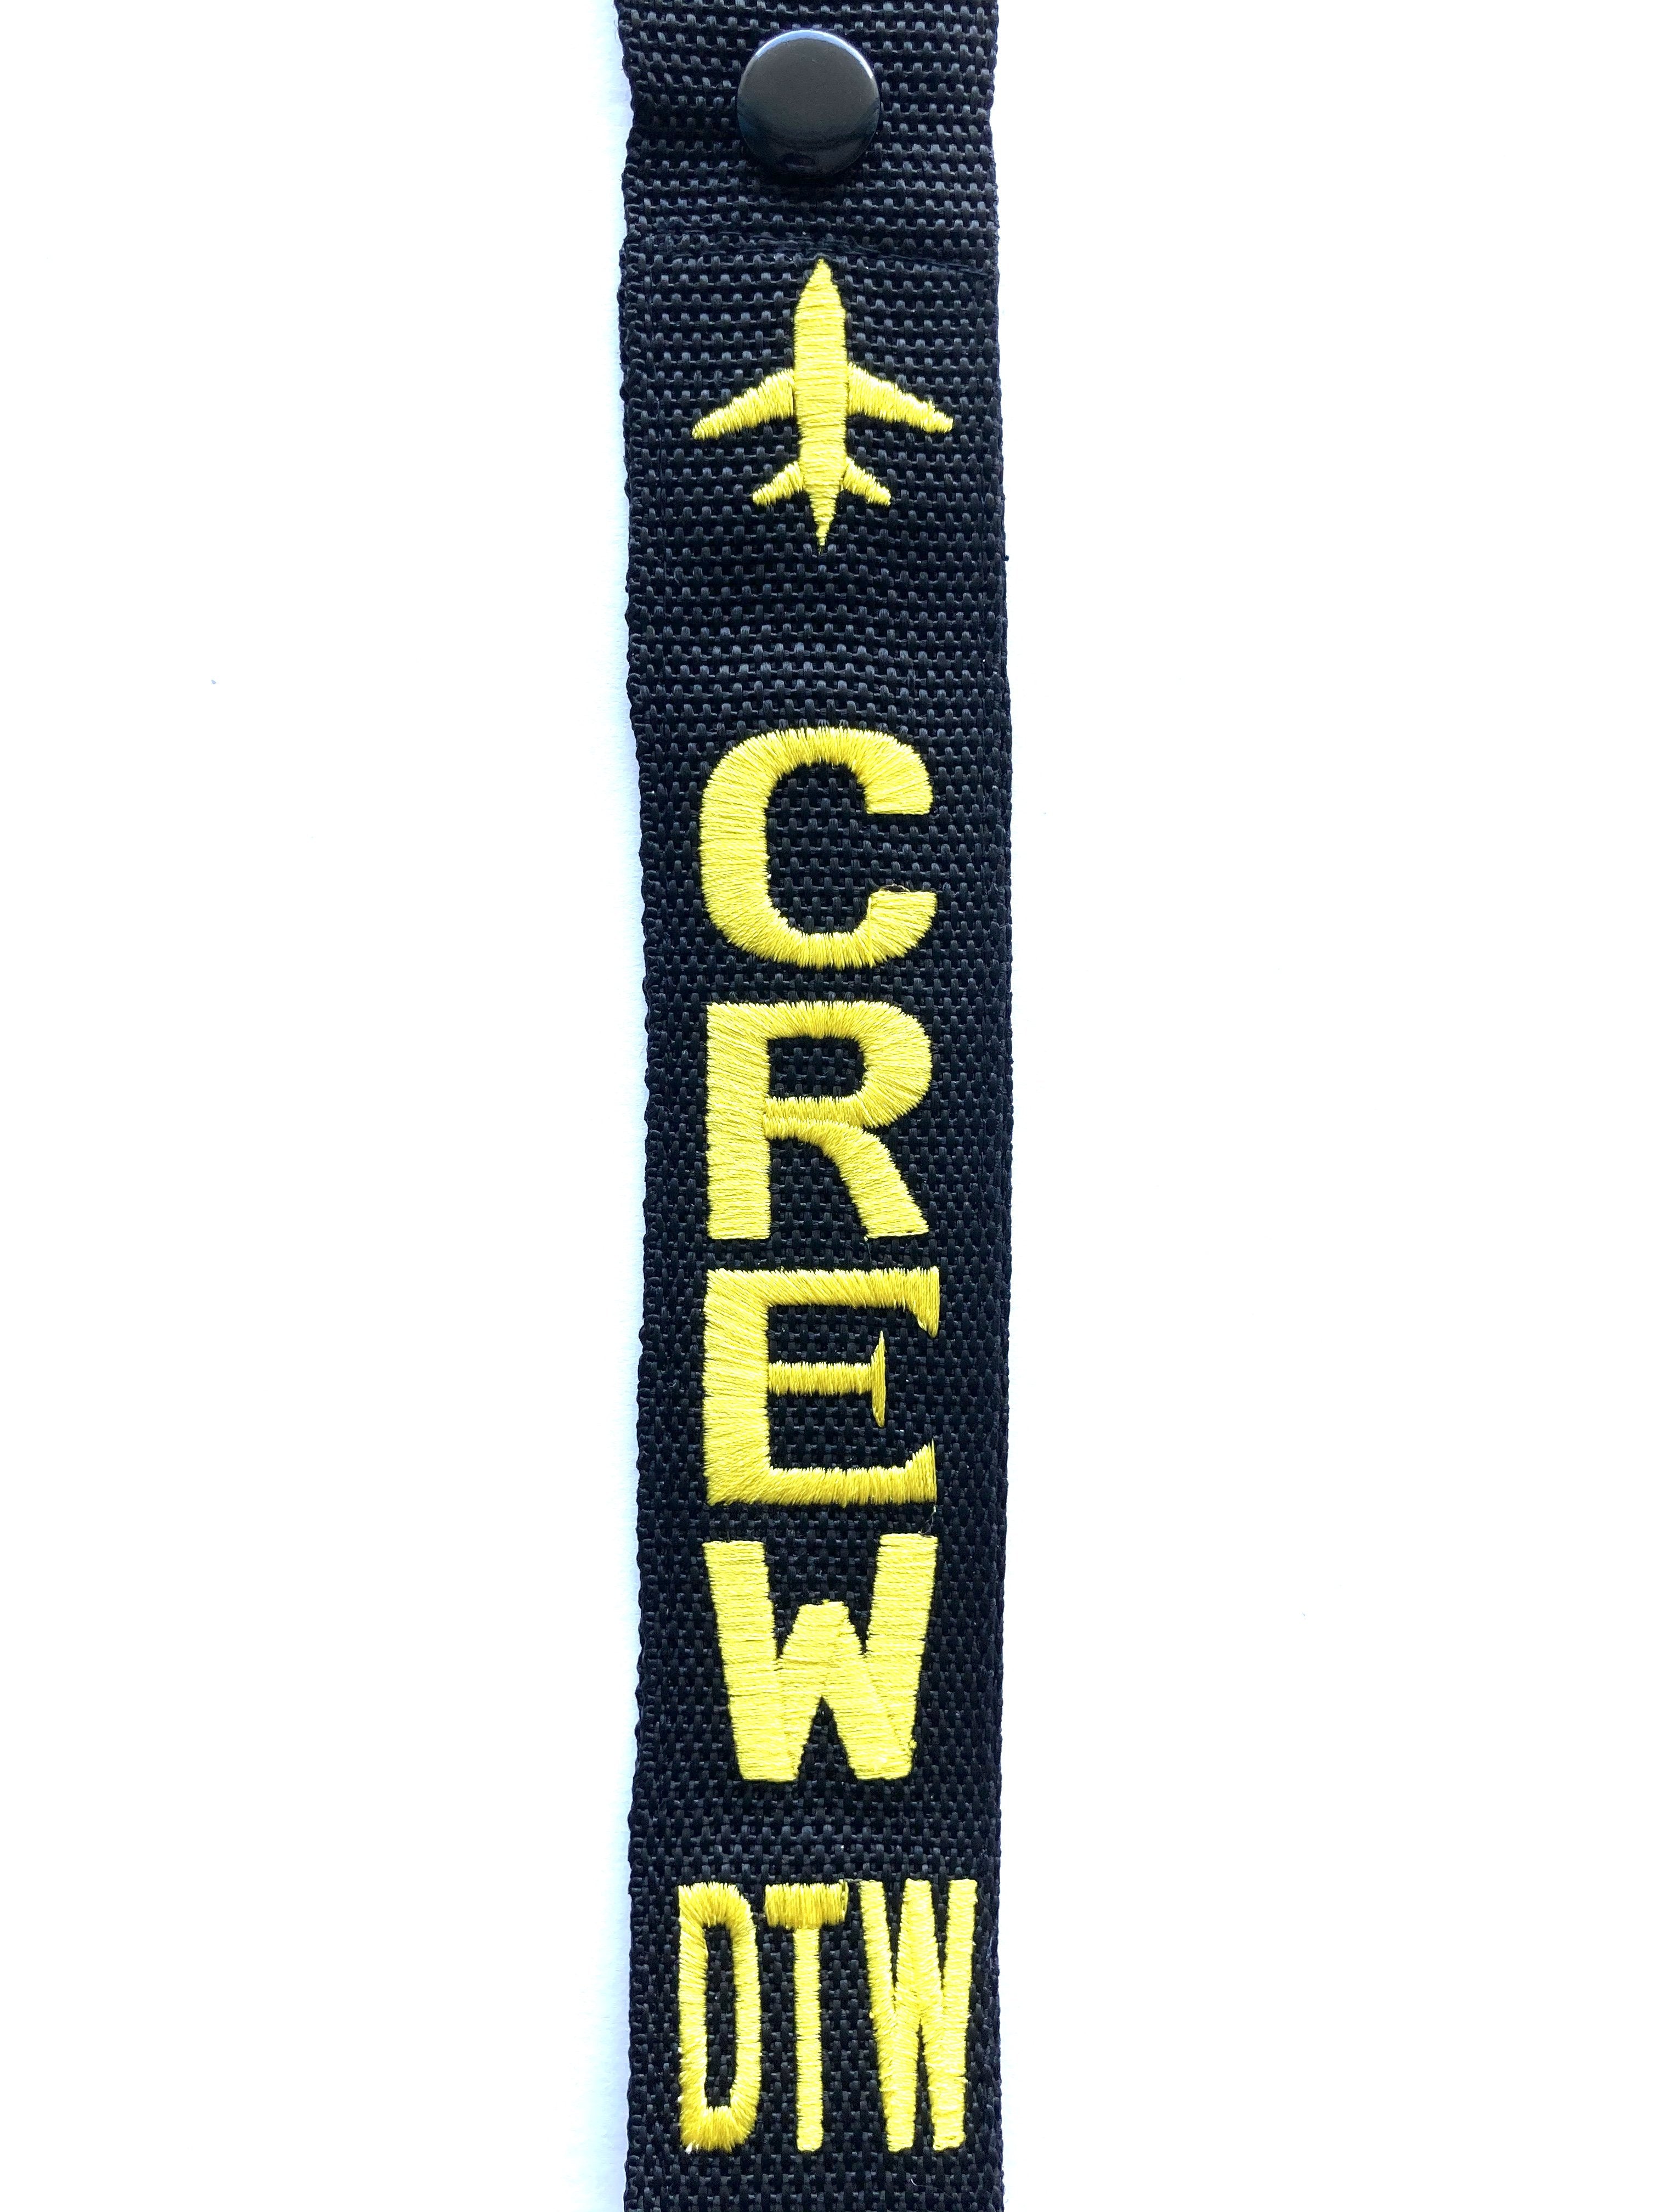 CREW Luggage Tag - DTW Yellow